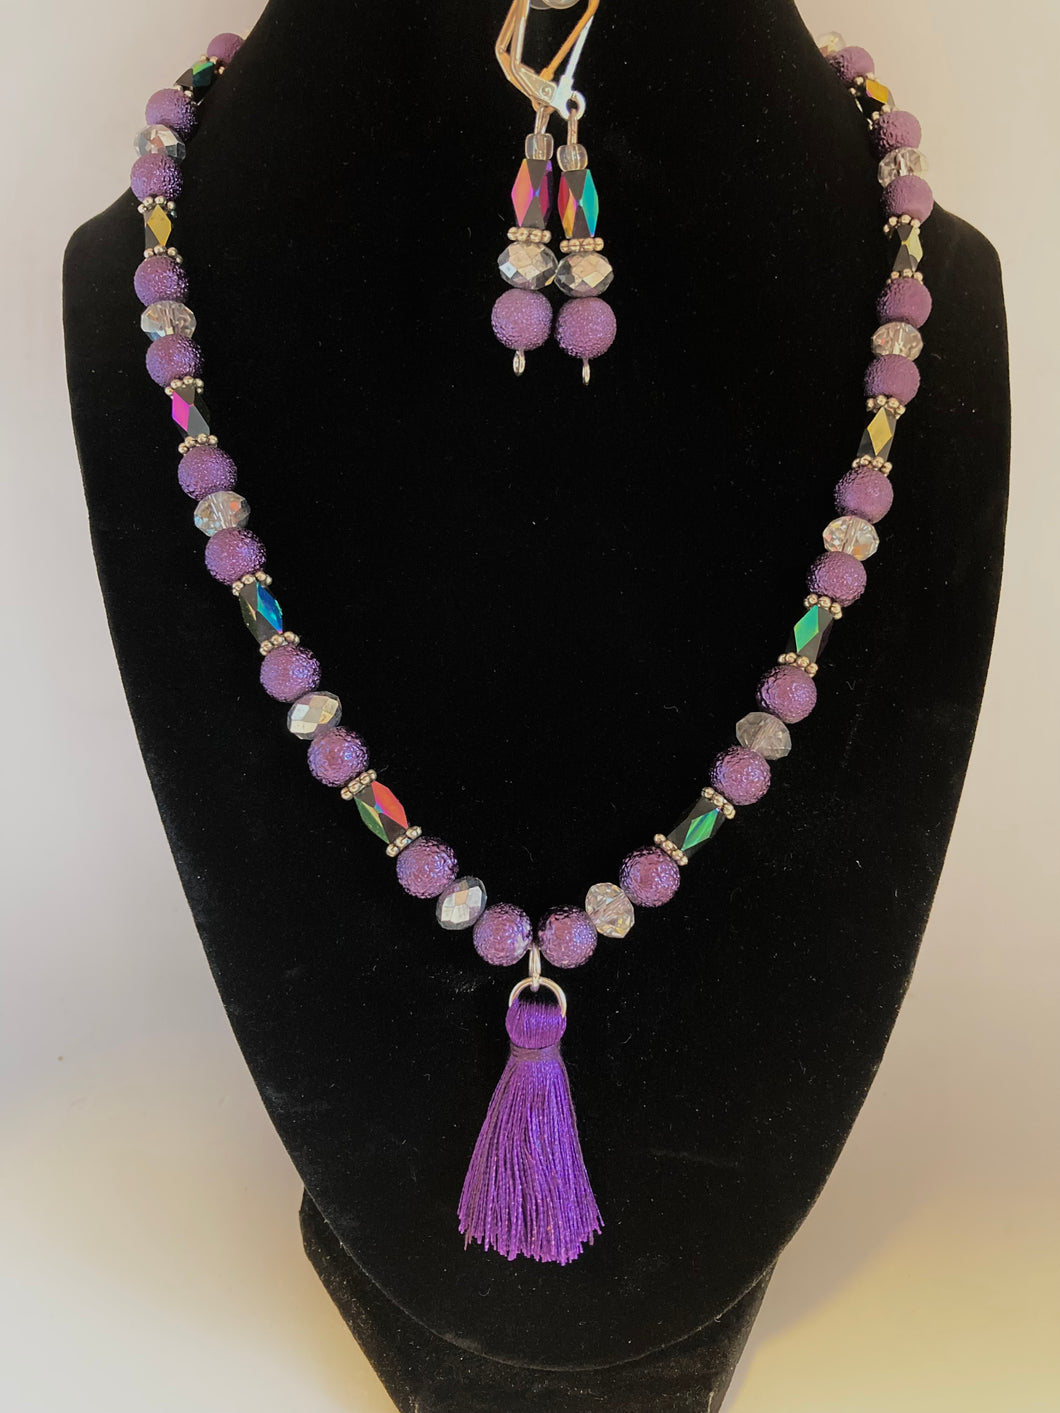 Purple tassle necklace and earrings